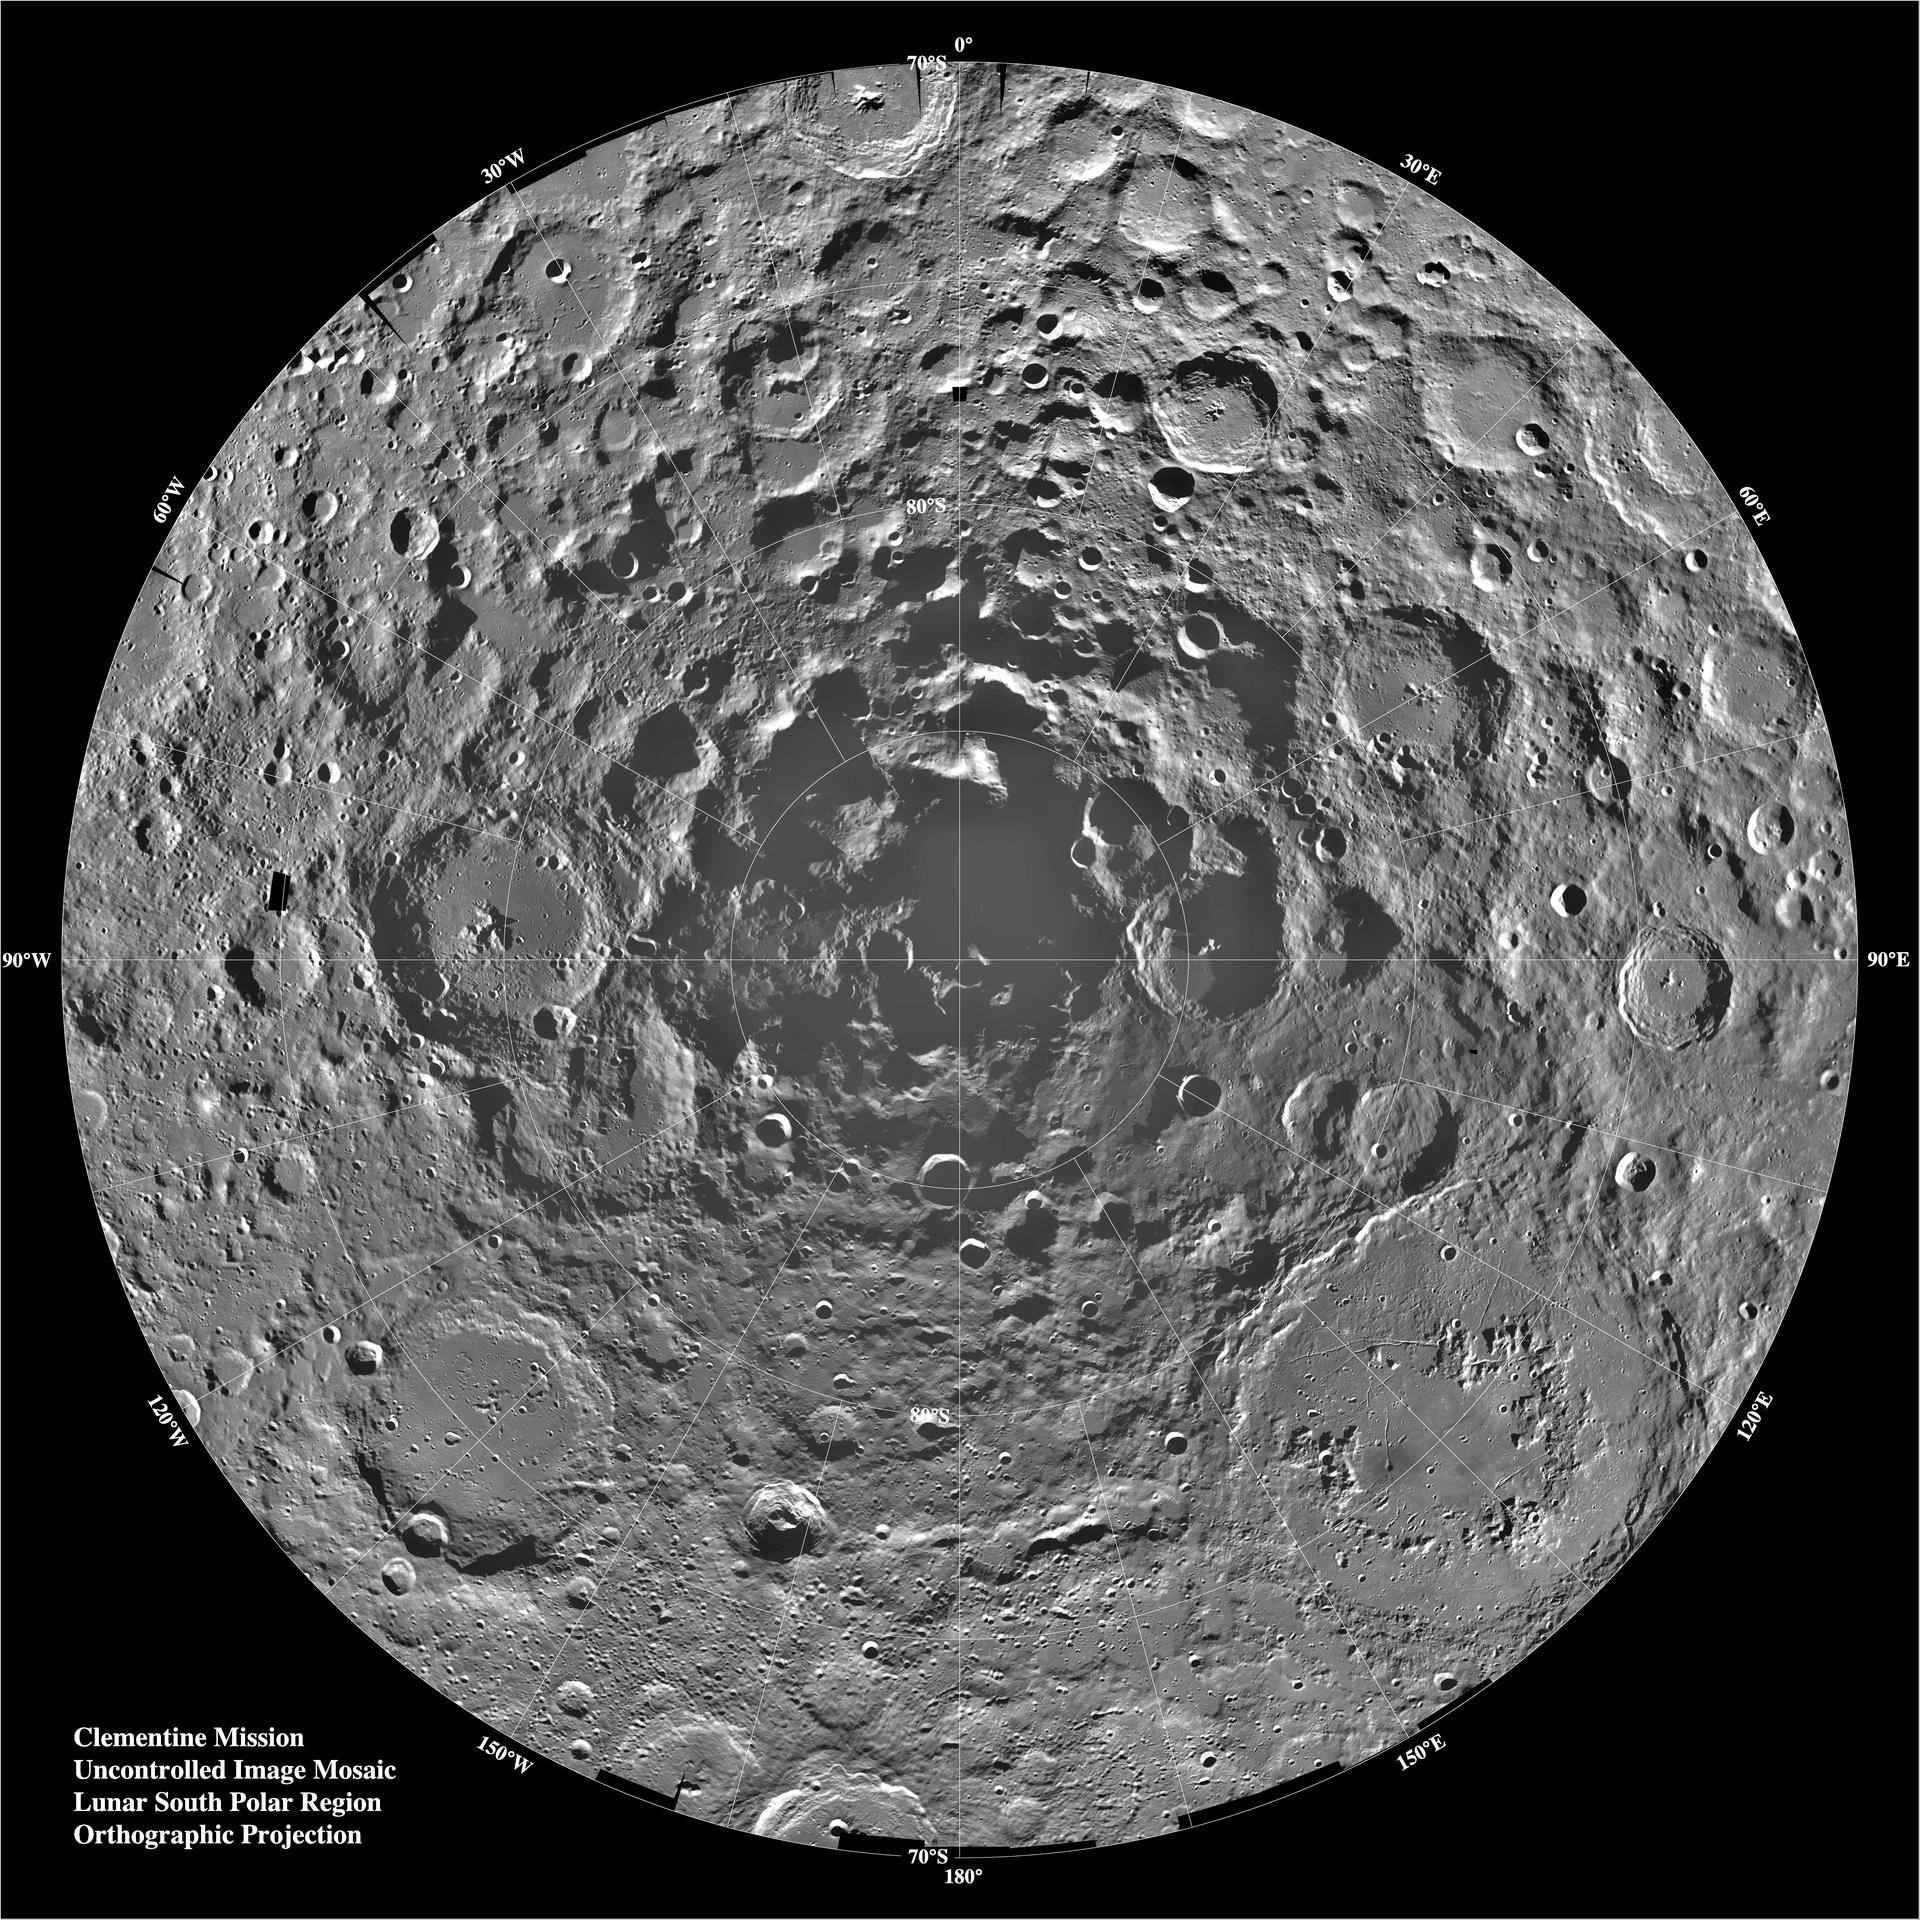 South Pole region of the Moon as seen by NASA's Clementine spacecraft.